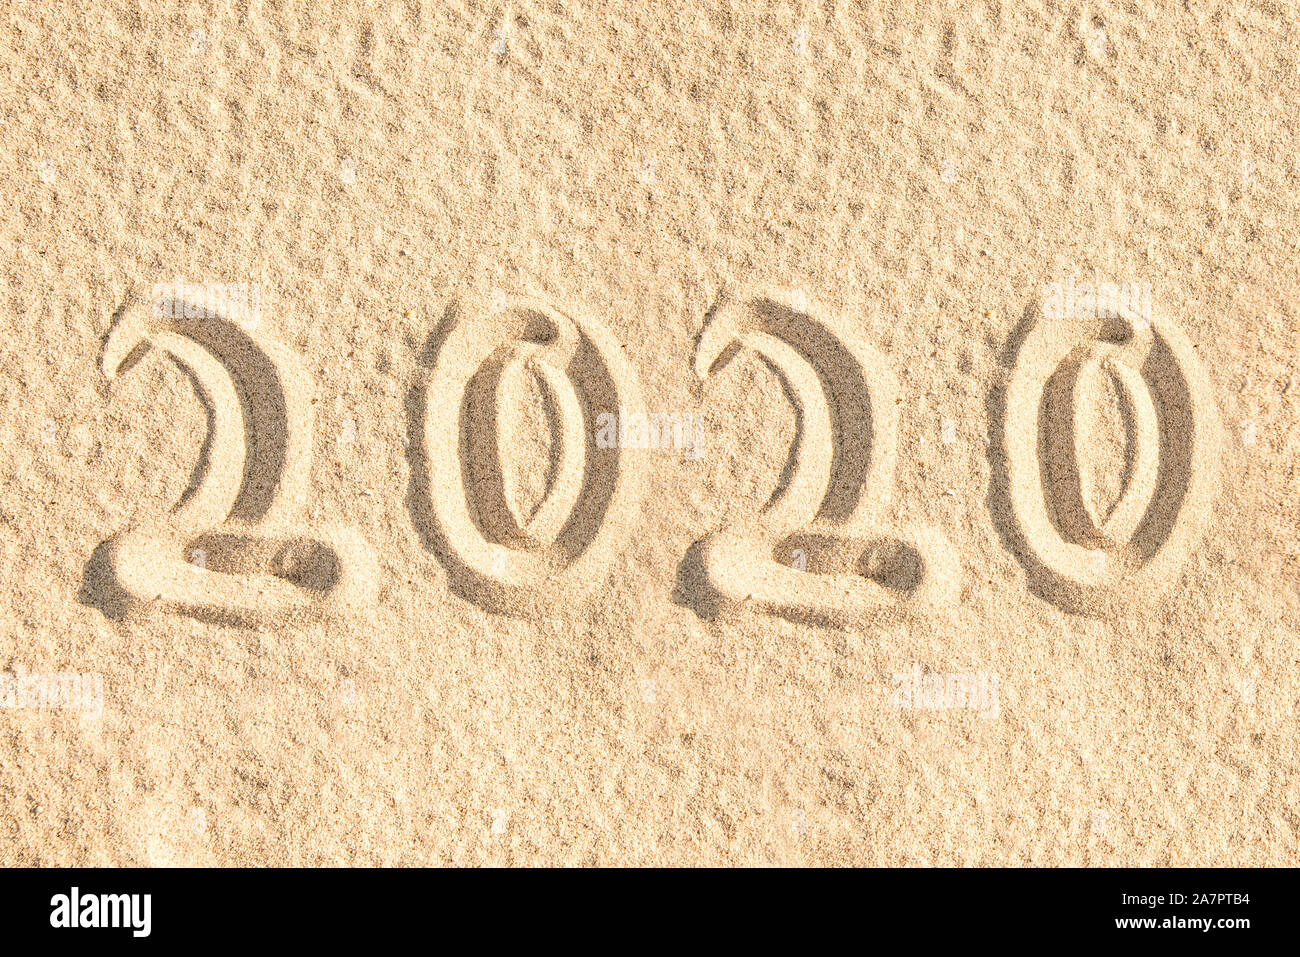 Year 2020 written in the sand of a beach, new year card Stock Photo